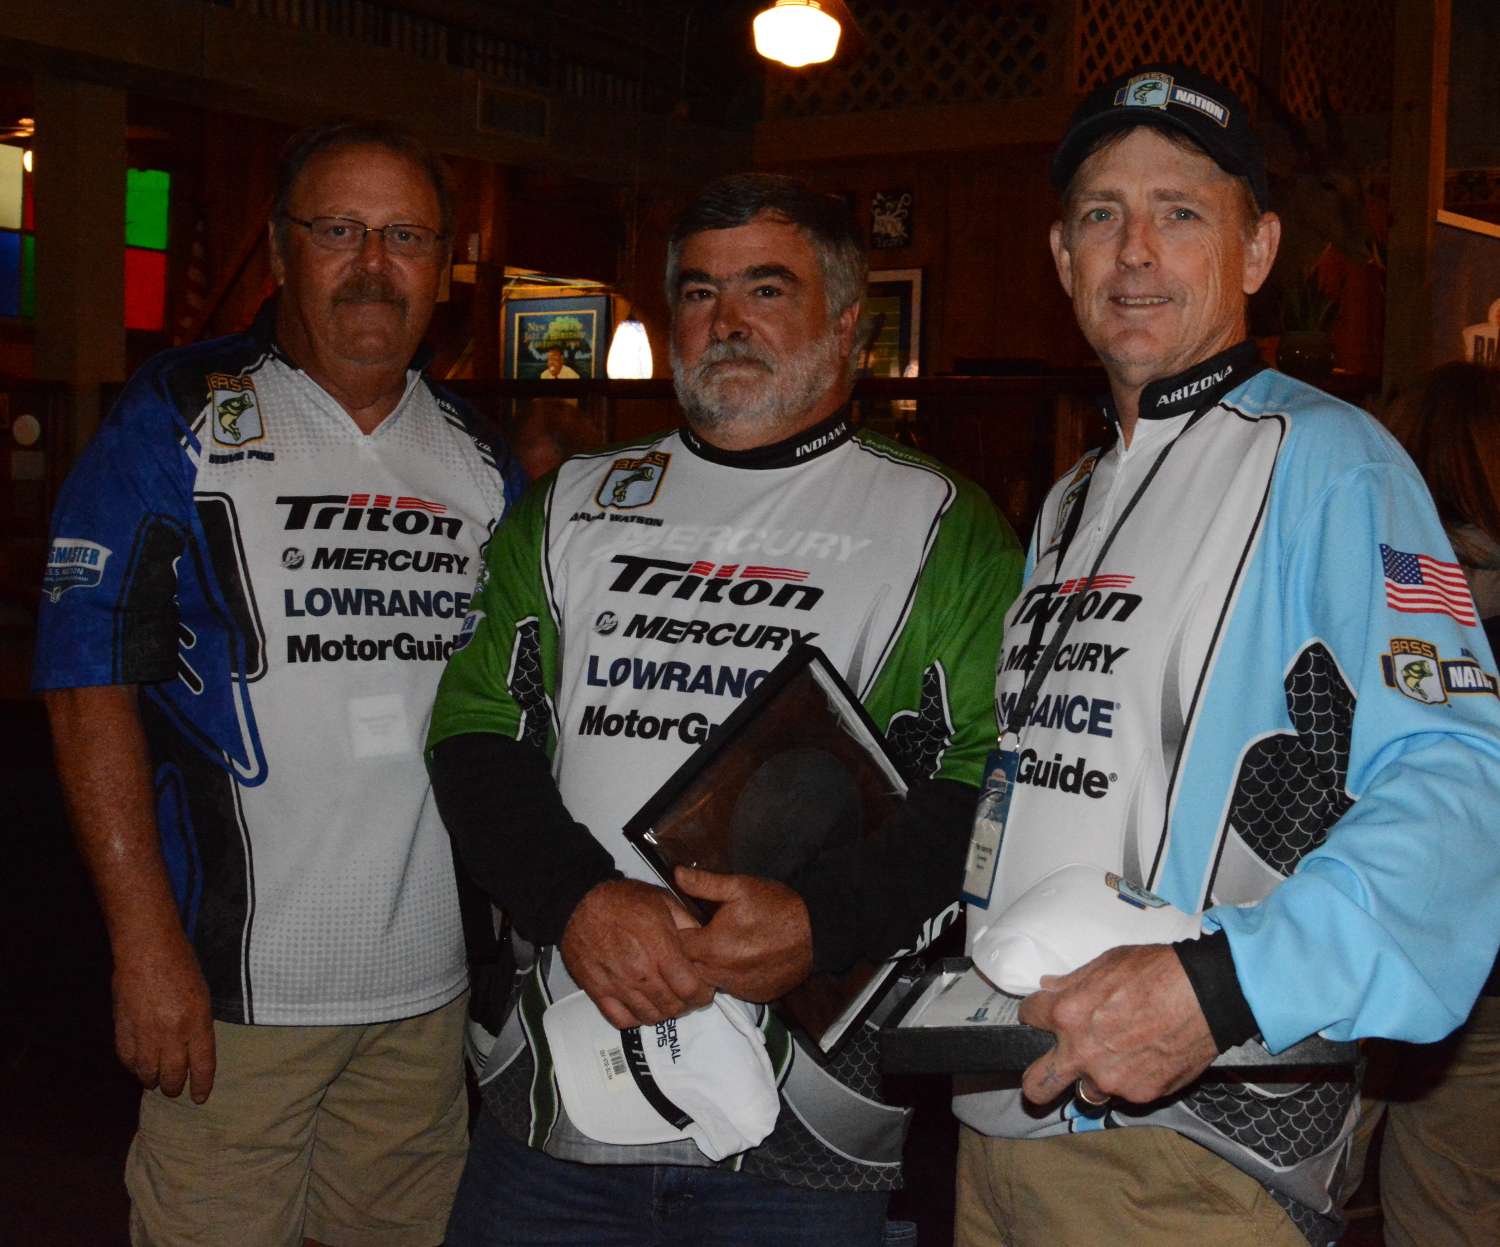 This is many anglers' first time in Louisiana, and these competitors from all over the country are meeting new friends while here. From left are Steven Pike, Nevada; Dave Watson, Indiana; and Pat Hanning, Arizona.